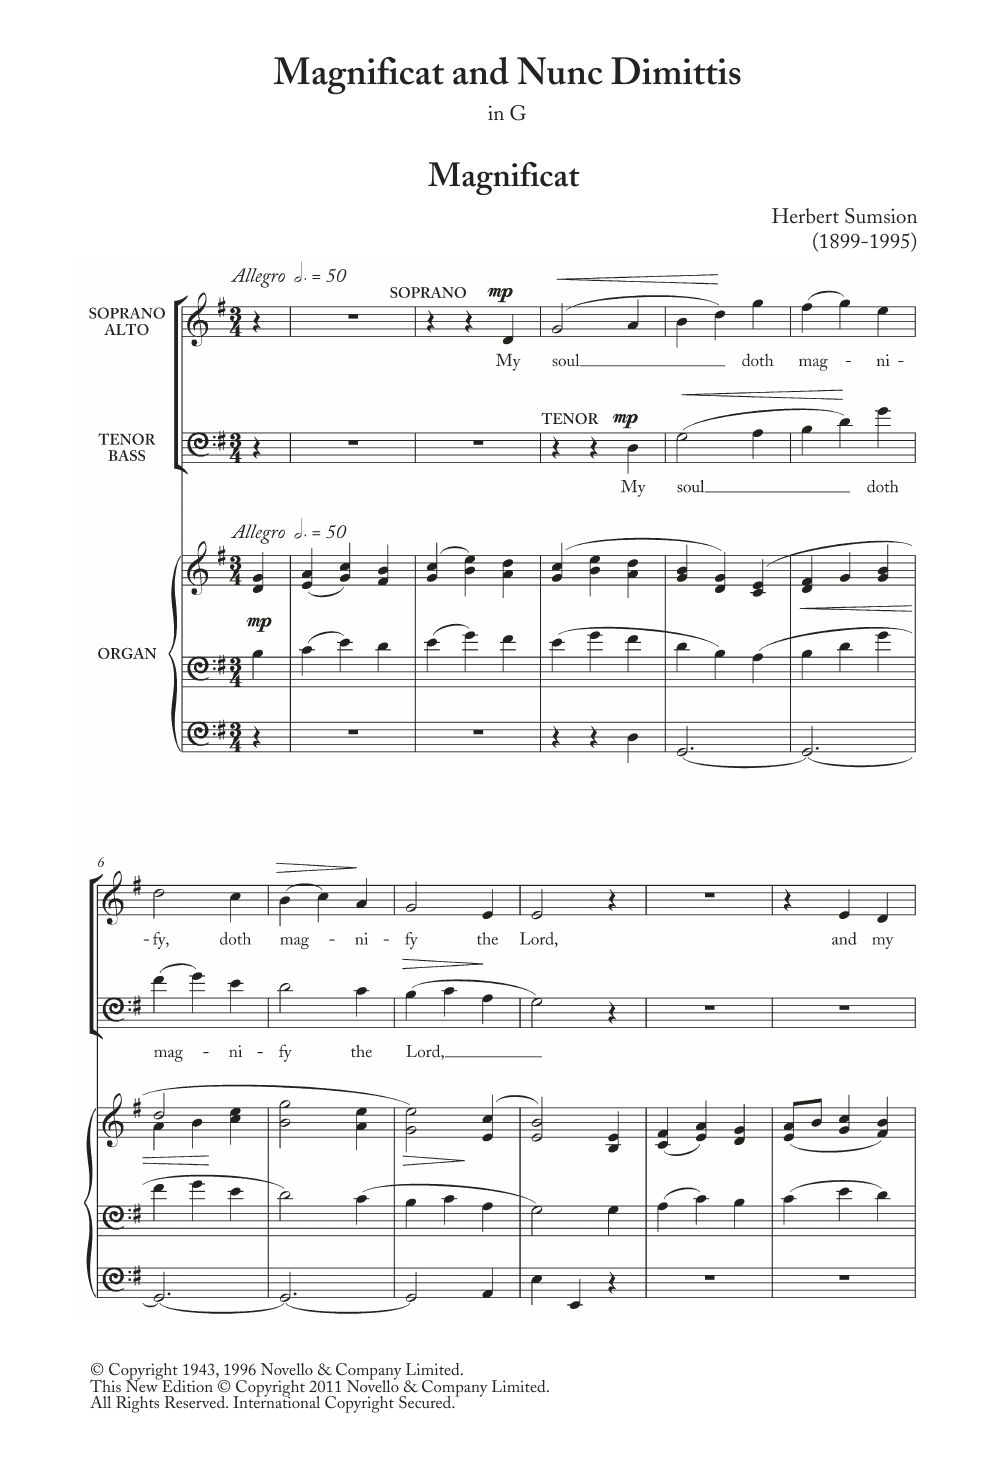 Download Herbert Sumsion Magnificat And Nunc Dimittis In G Sheet Music